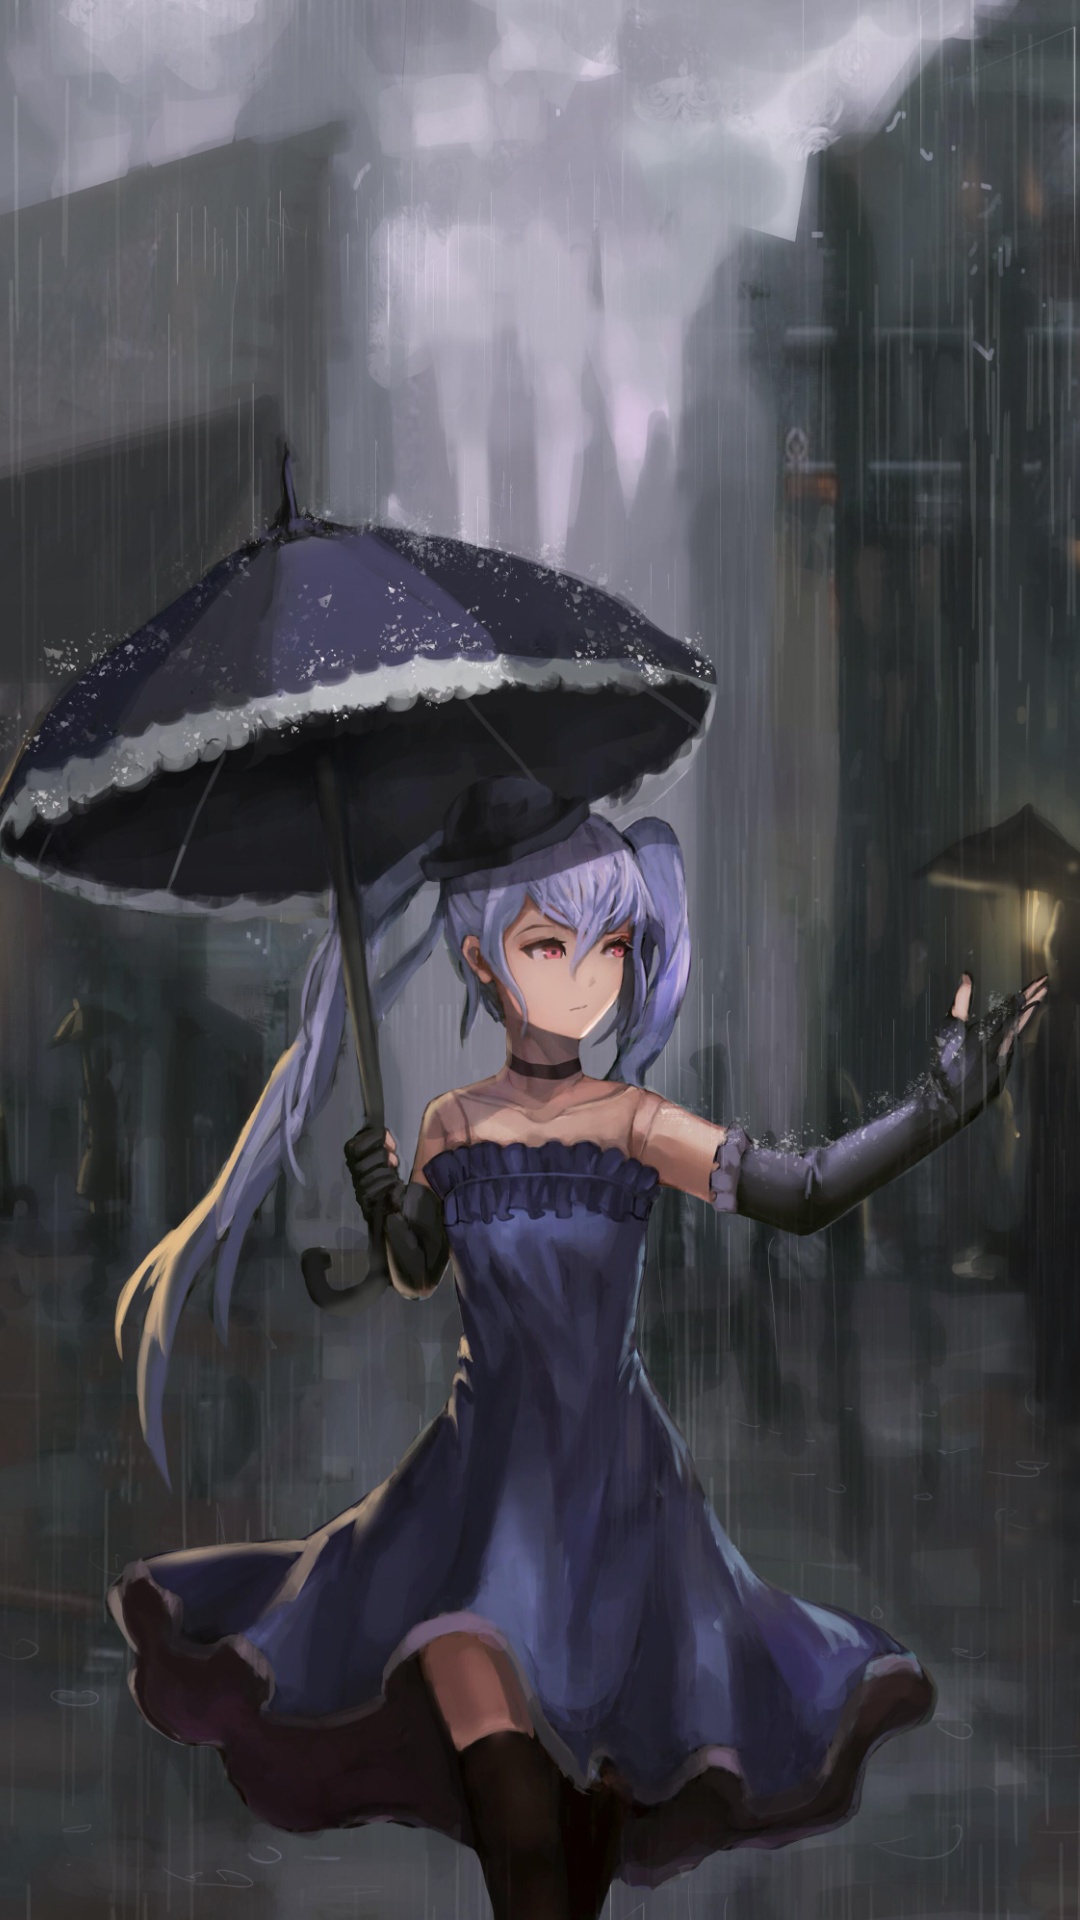 Anime Girl With Umbrella Wallpaper Images